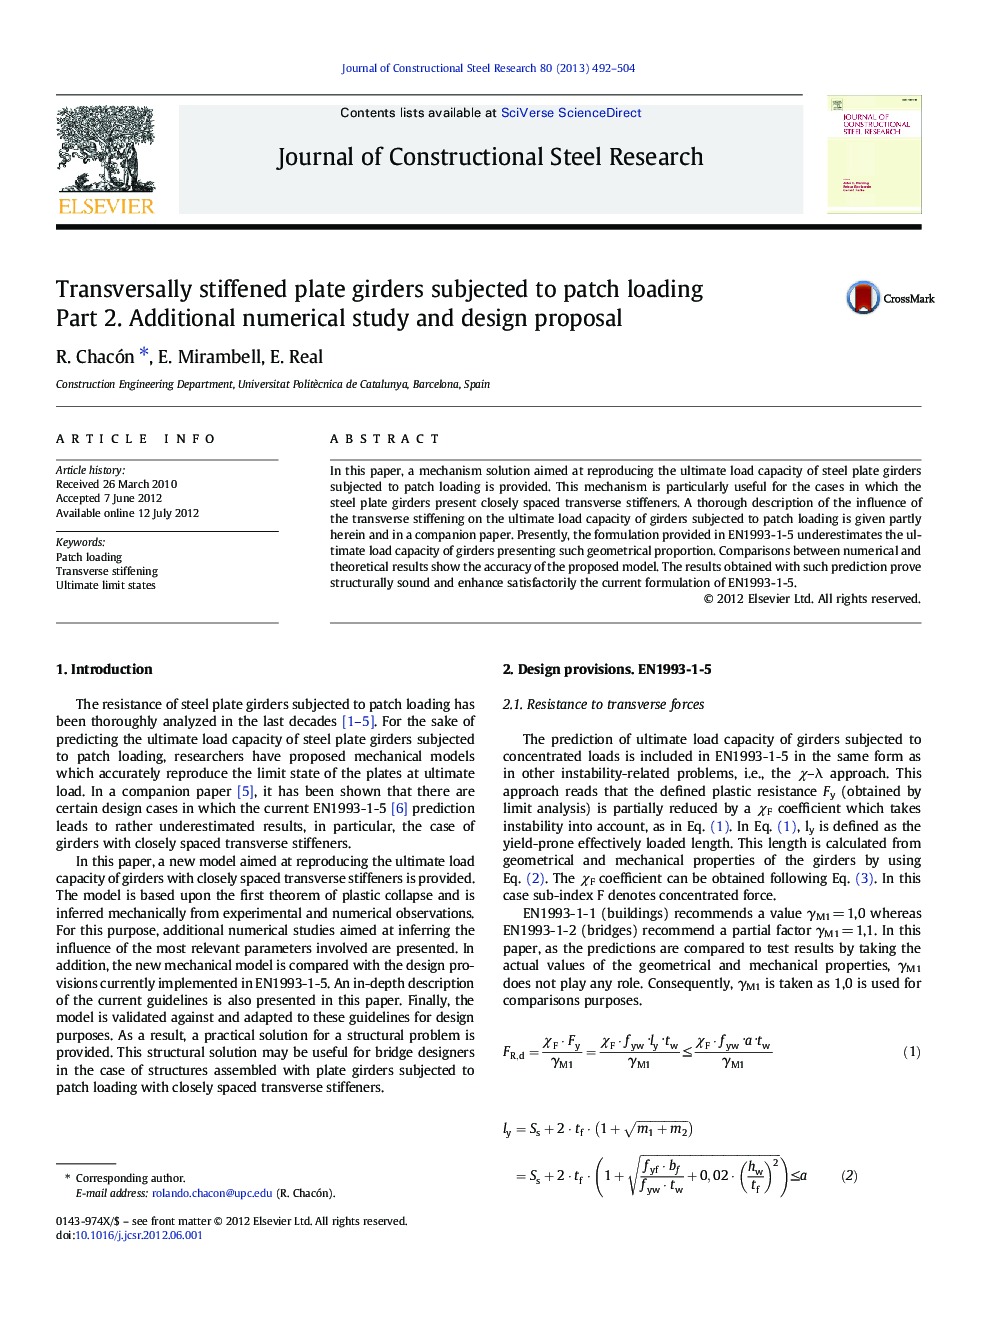 Transversally stiffened plate girders subjected to patch loading: Part 2. Additional numerical study and design proposal